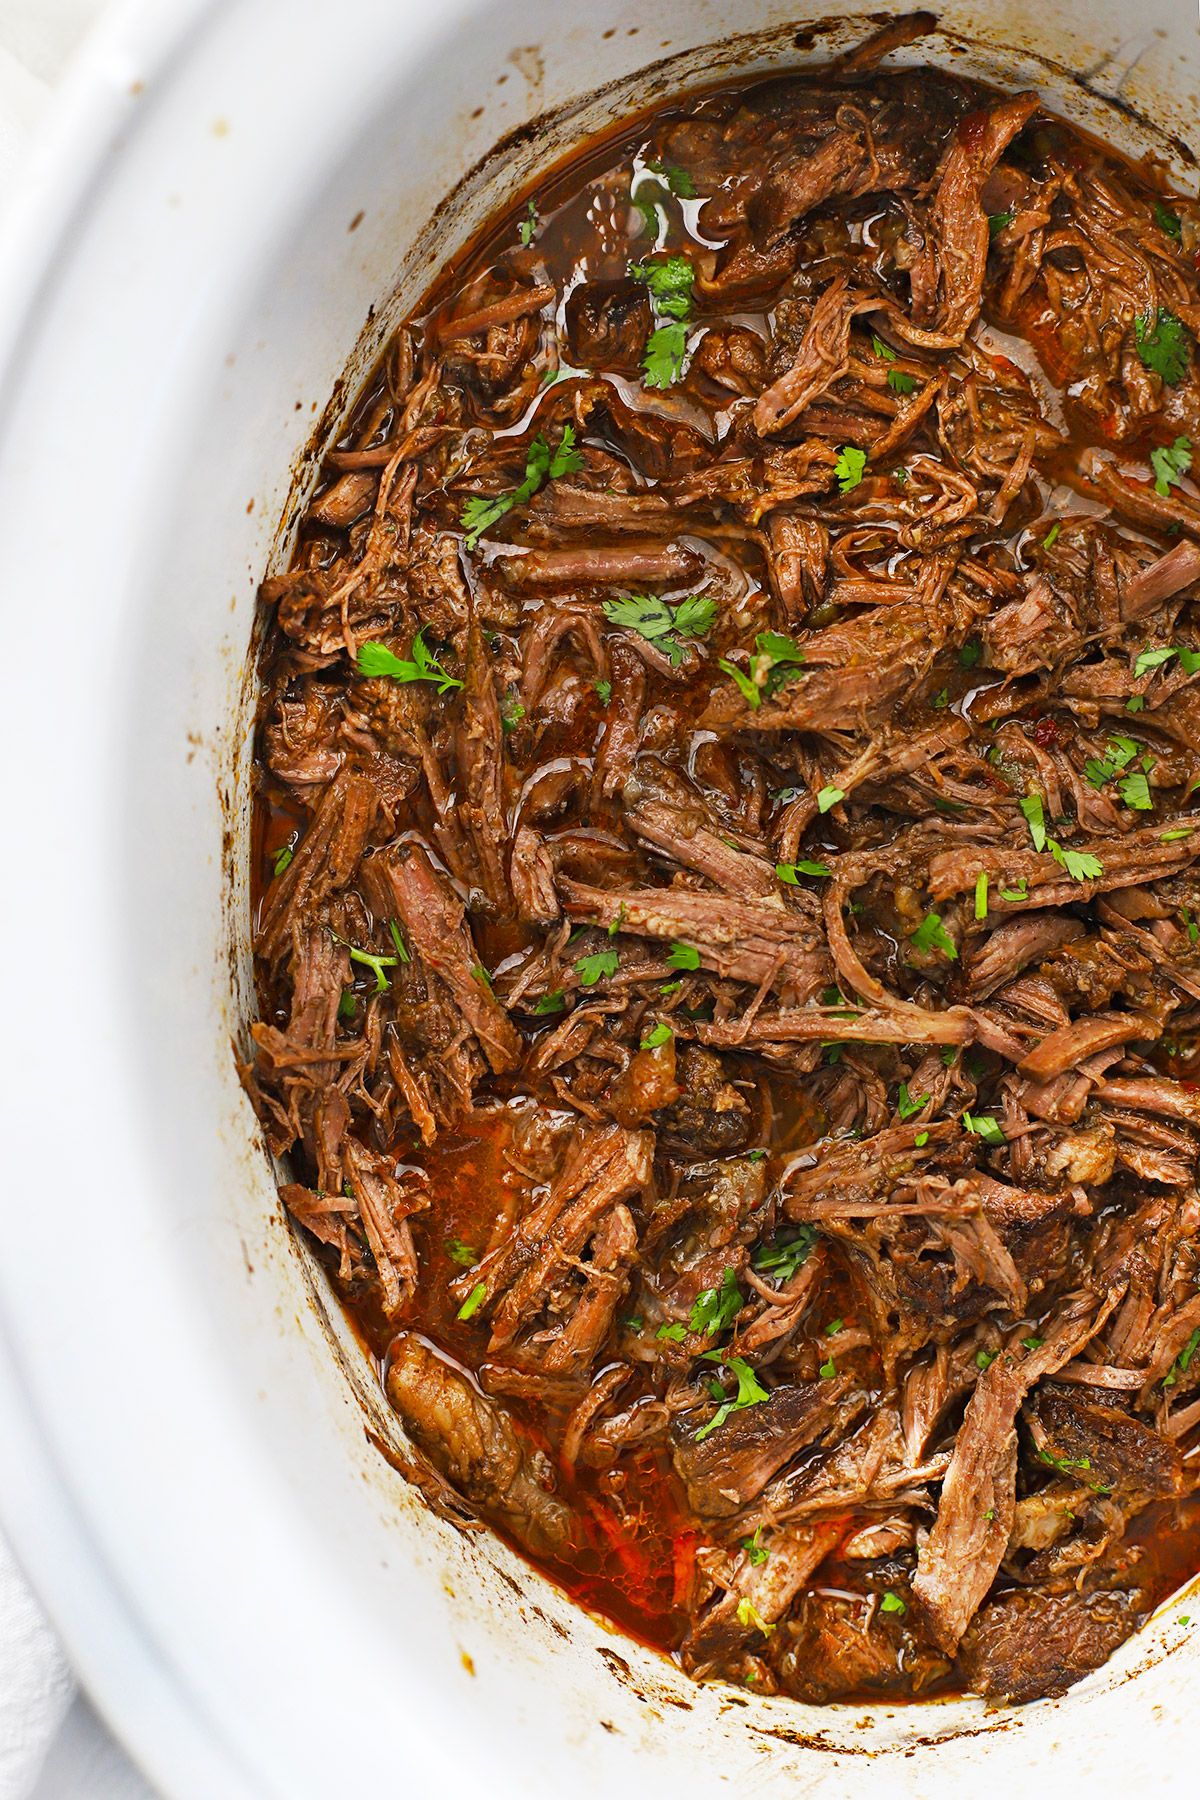 Overhead view of a slow cooker full of barbacoa beef